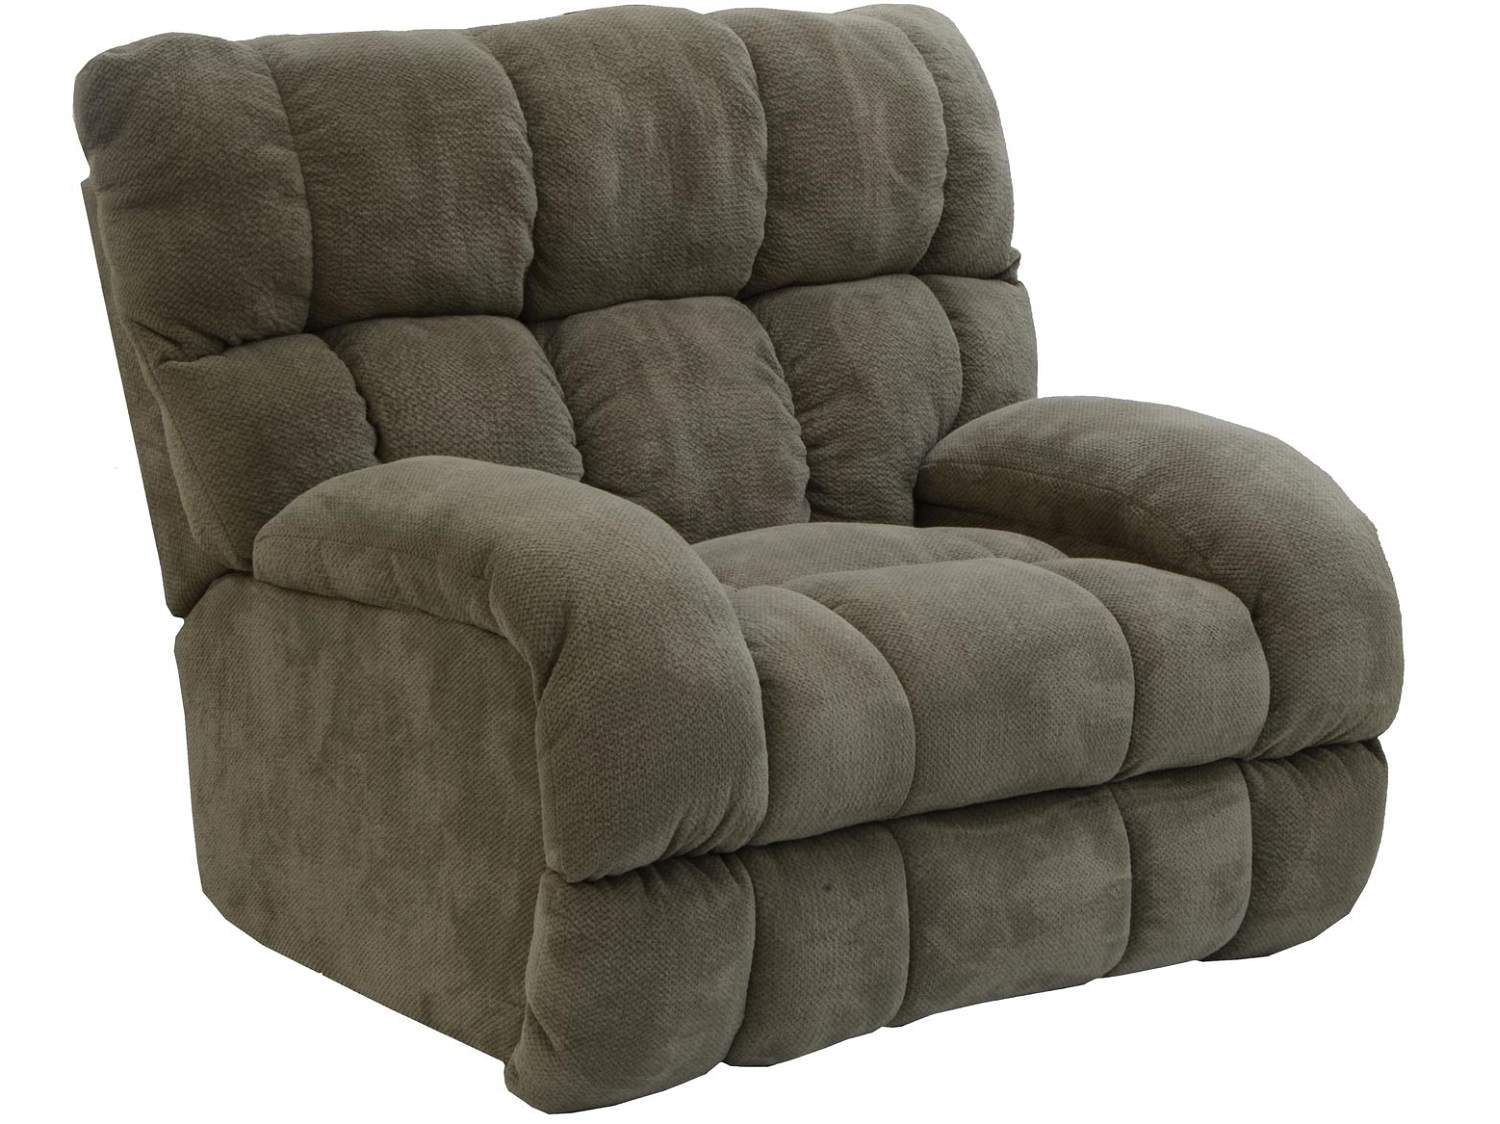 PERRY Recliner Chair - Zoom